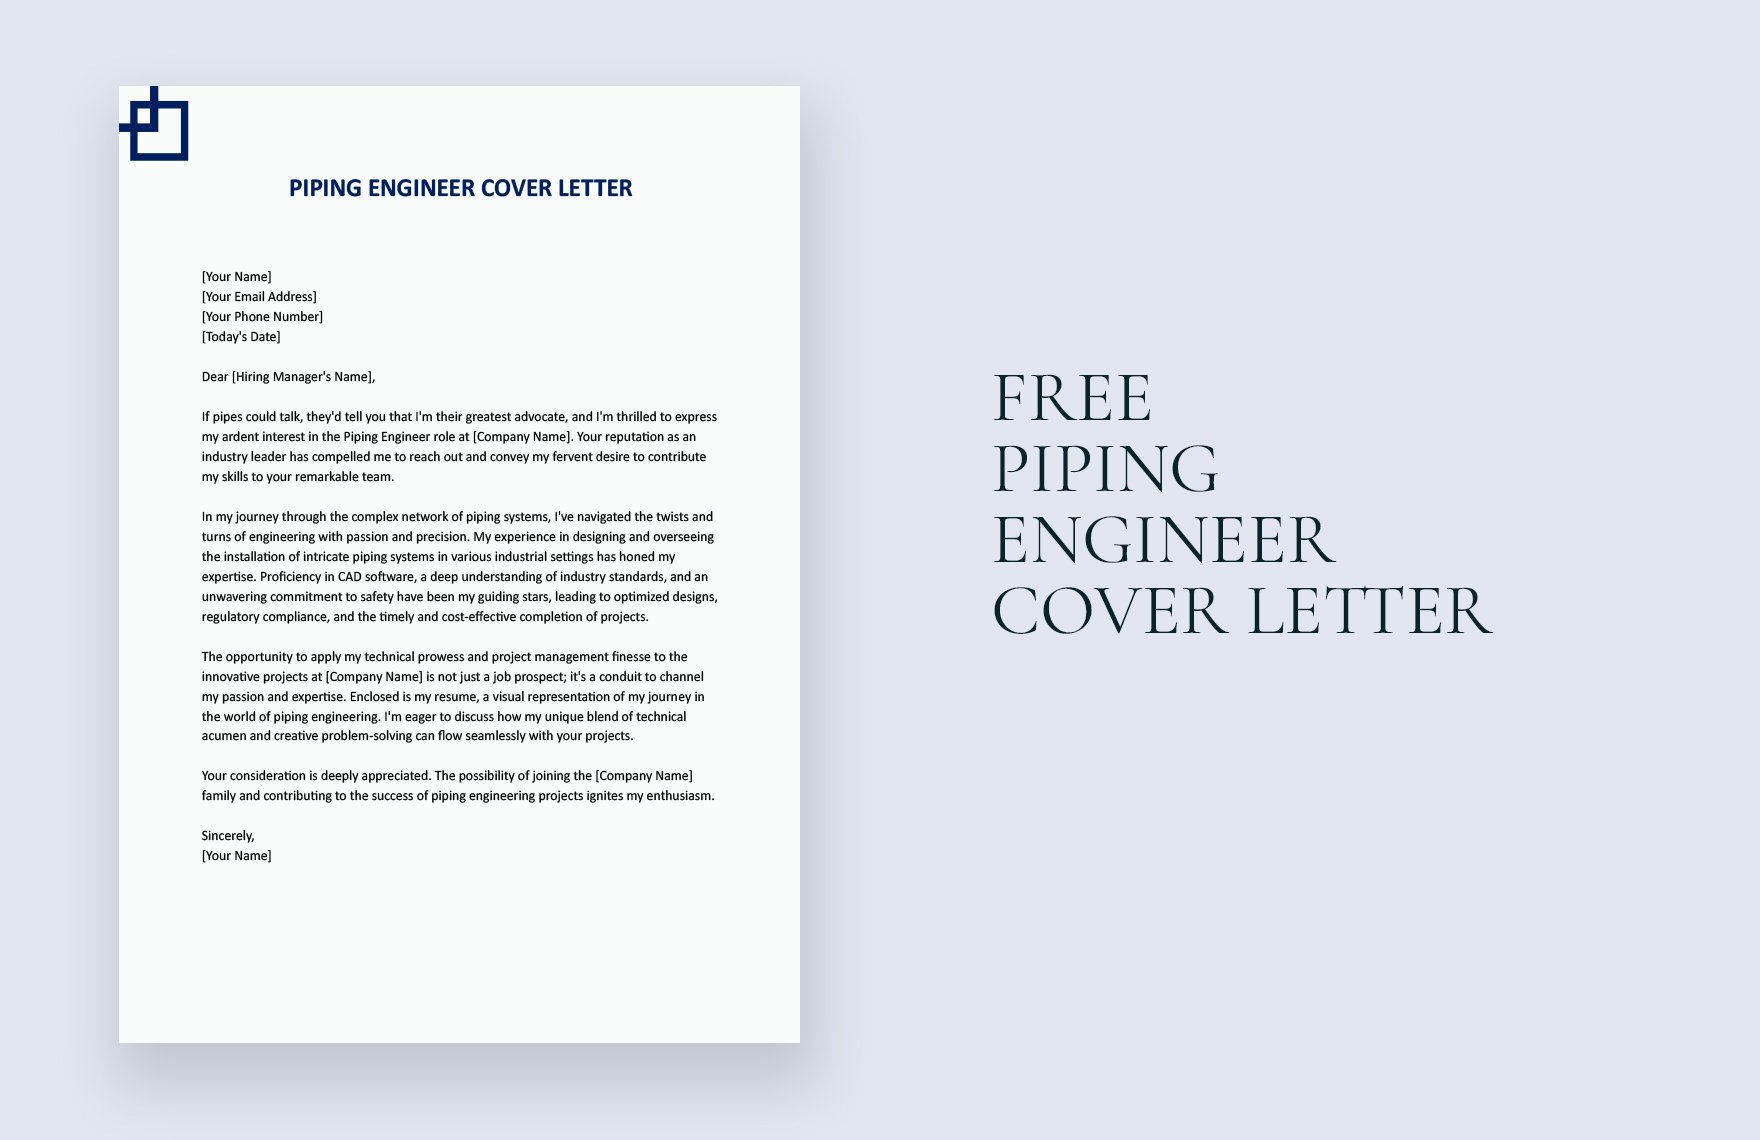 Piping Engineer Cover Letter